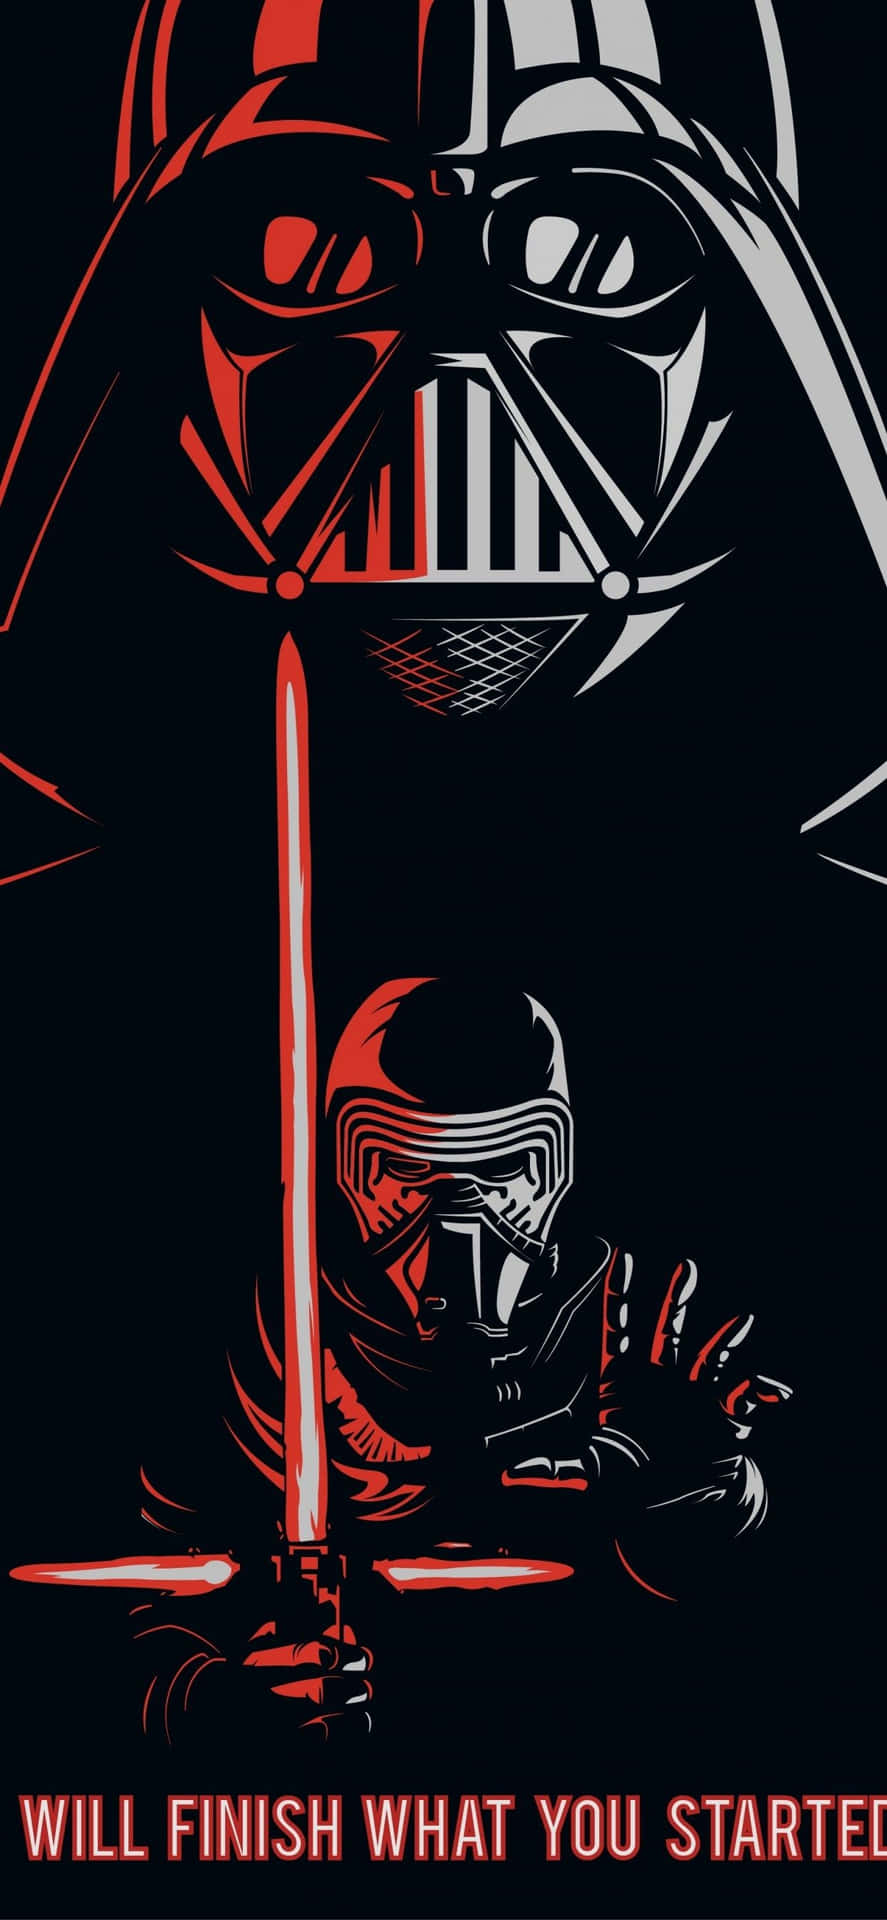 Unlock the Dark Side with the new Darth Vader Iphone Wallpaper